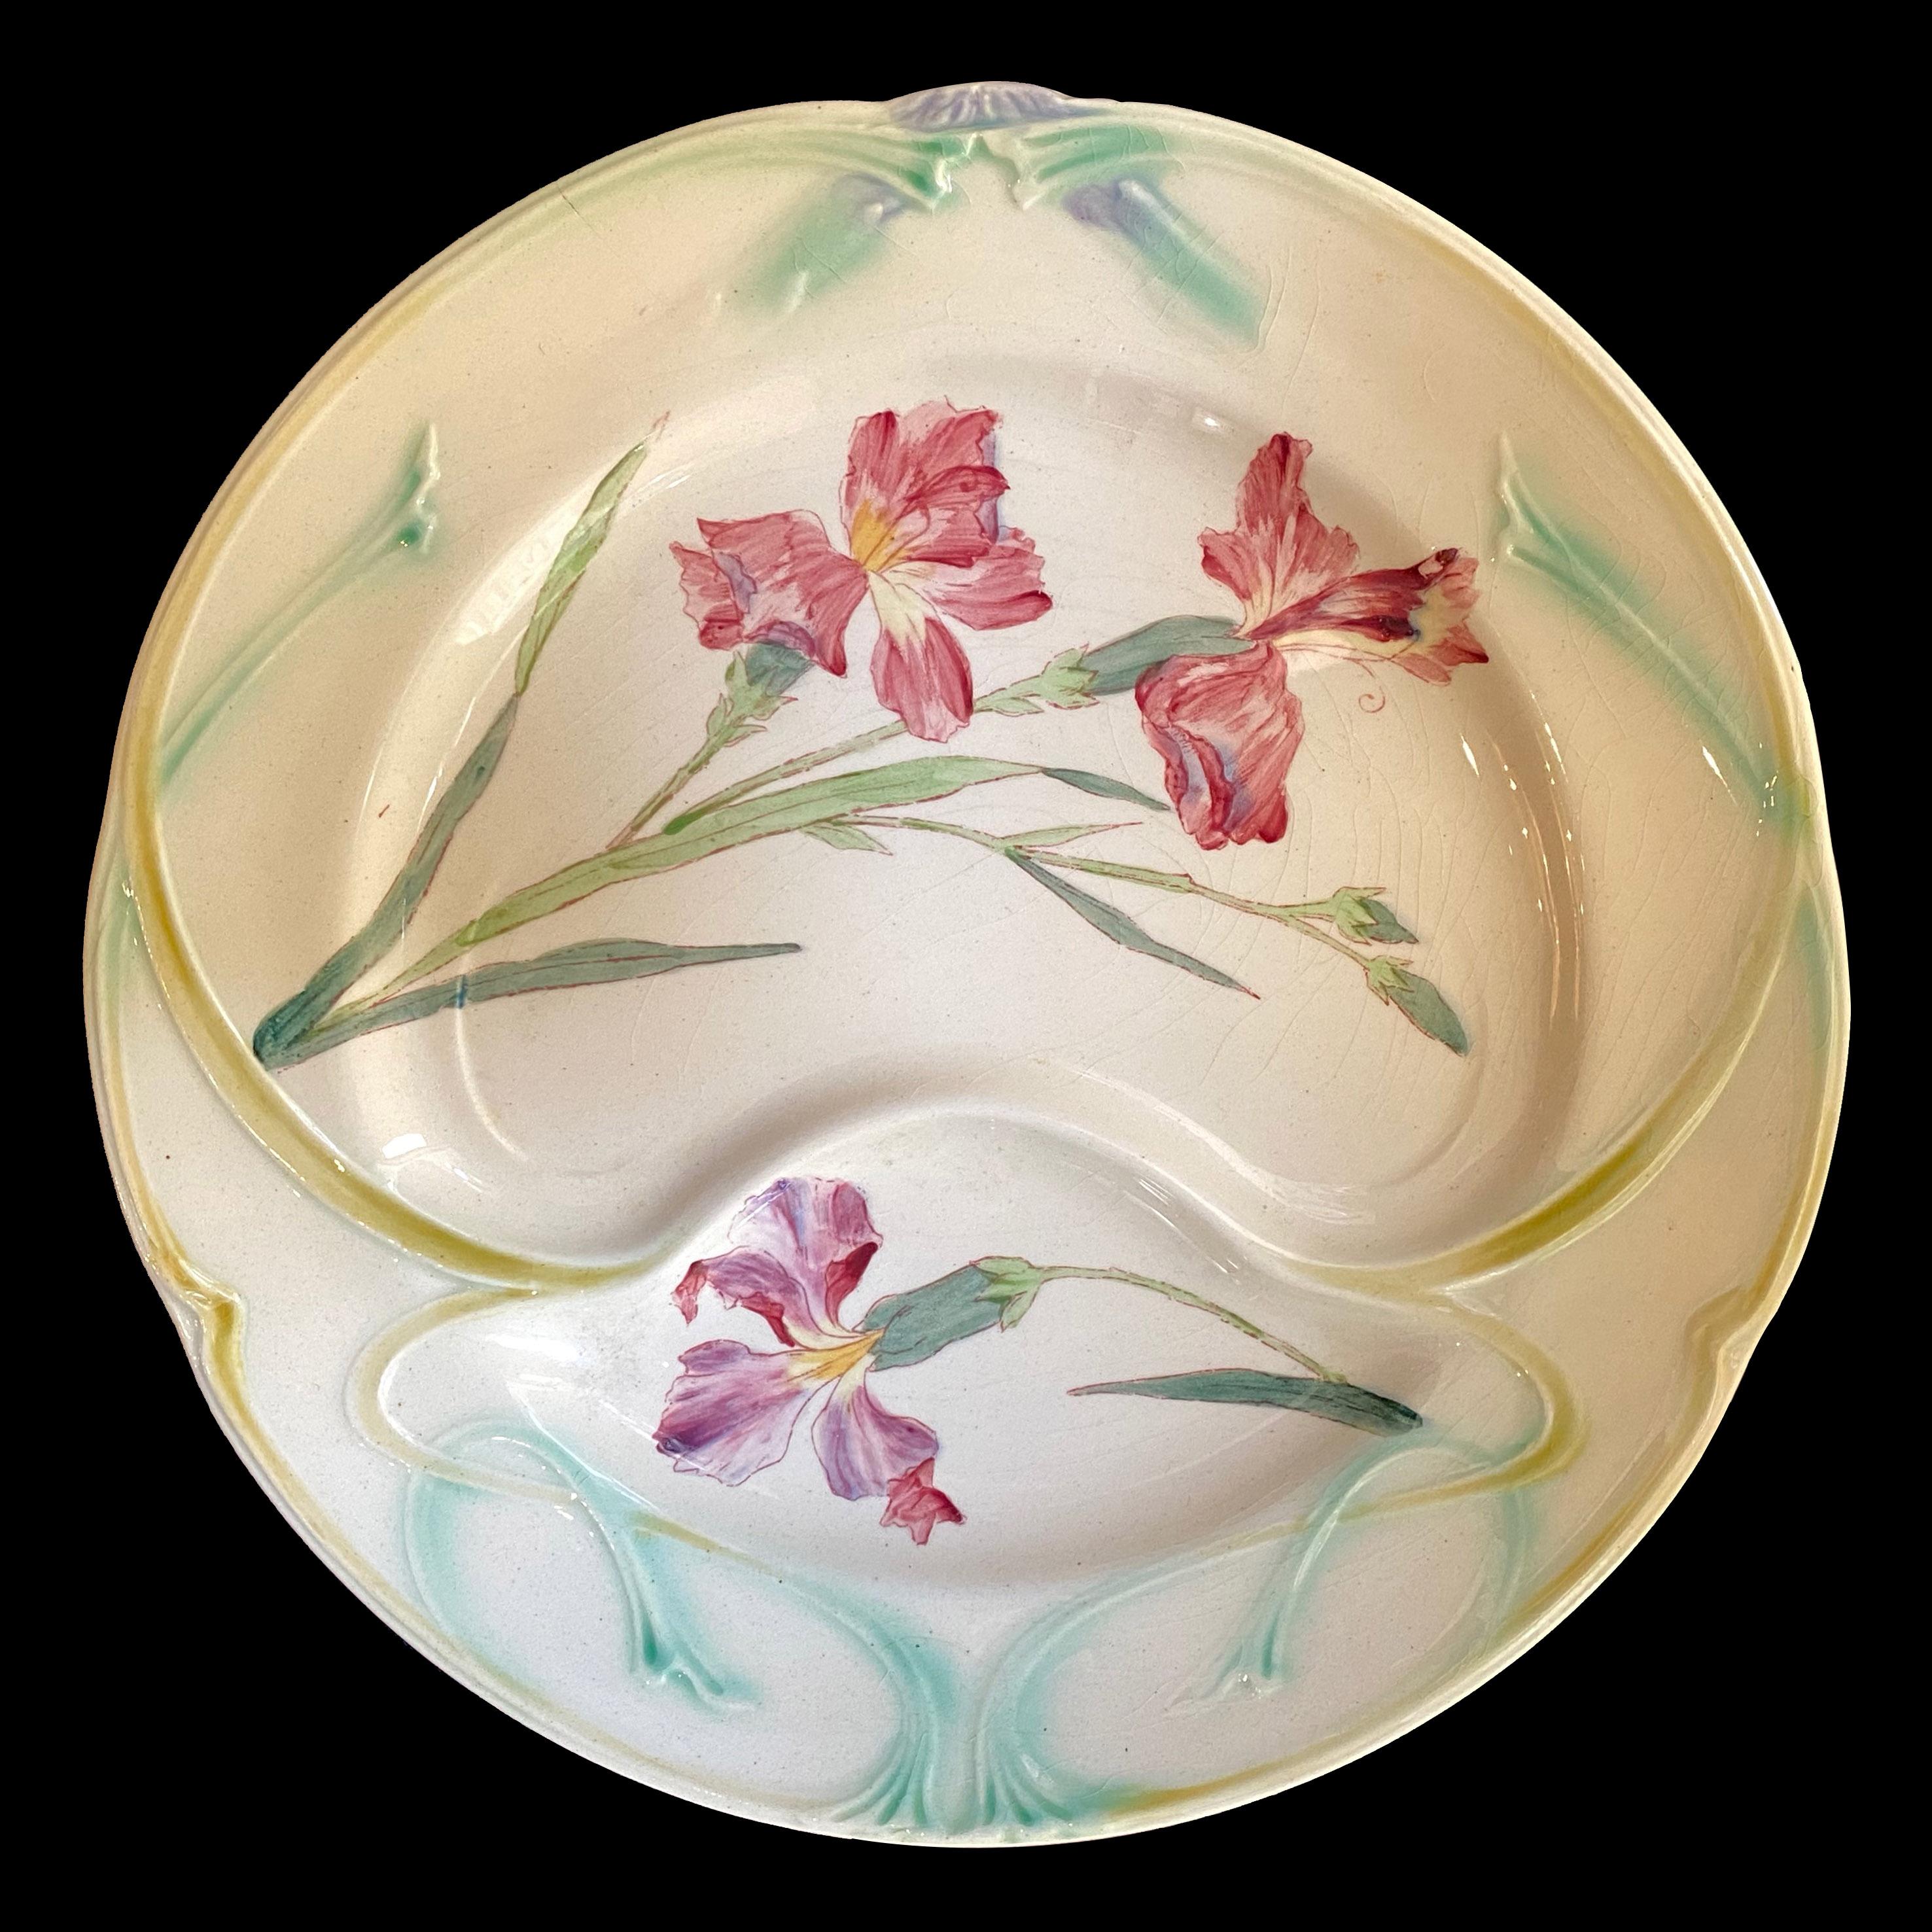 Hand-Painted 2 Asparagus Art Nouveau Plates with Iris Hand Painted, French Barbotine 19th